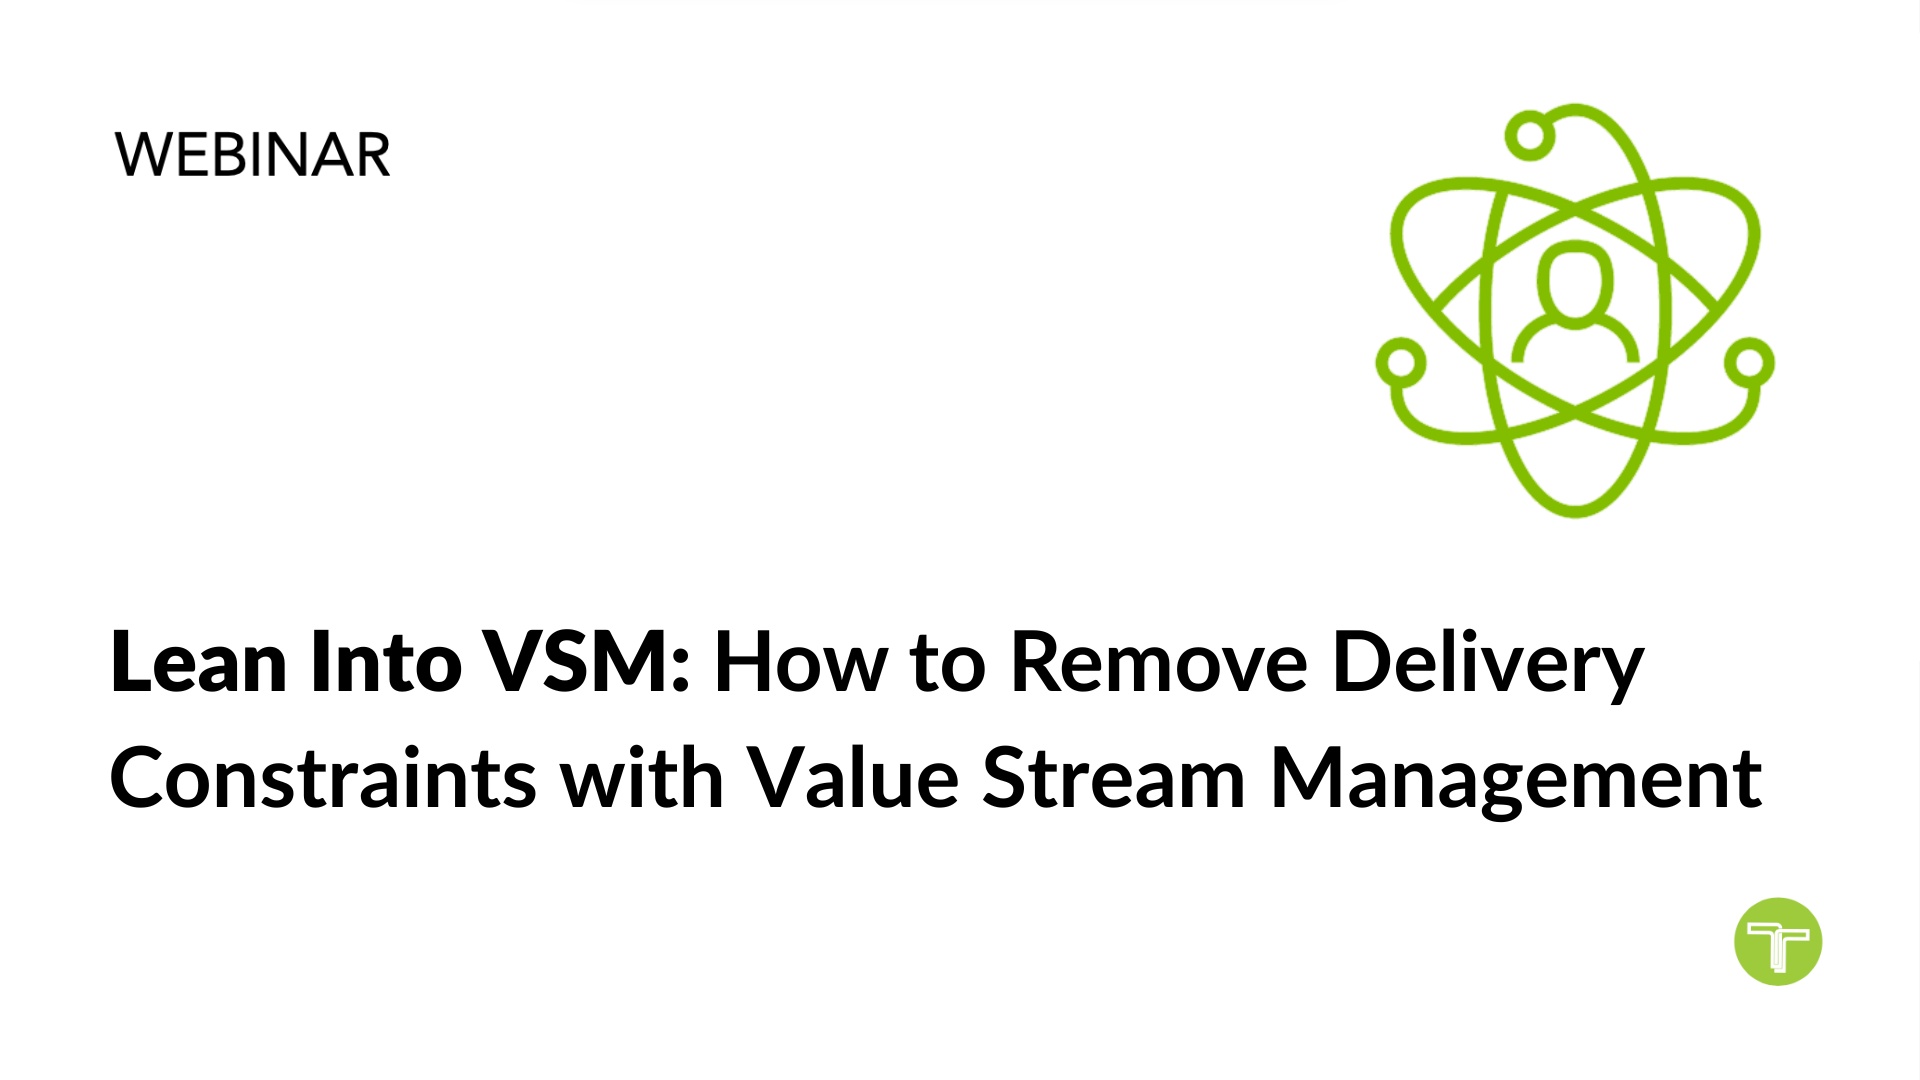 Lean Into VSM: How to Remove Delivery Constraints with Value Stream Management